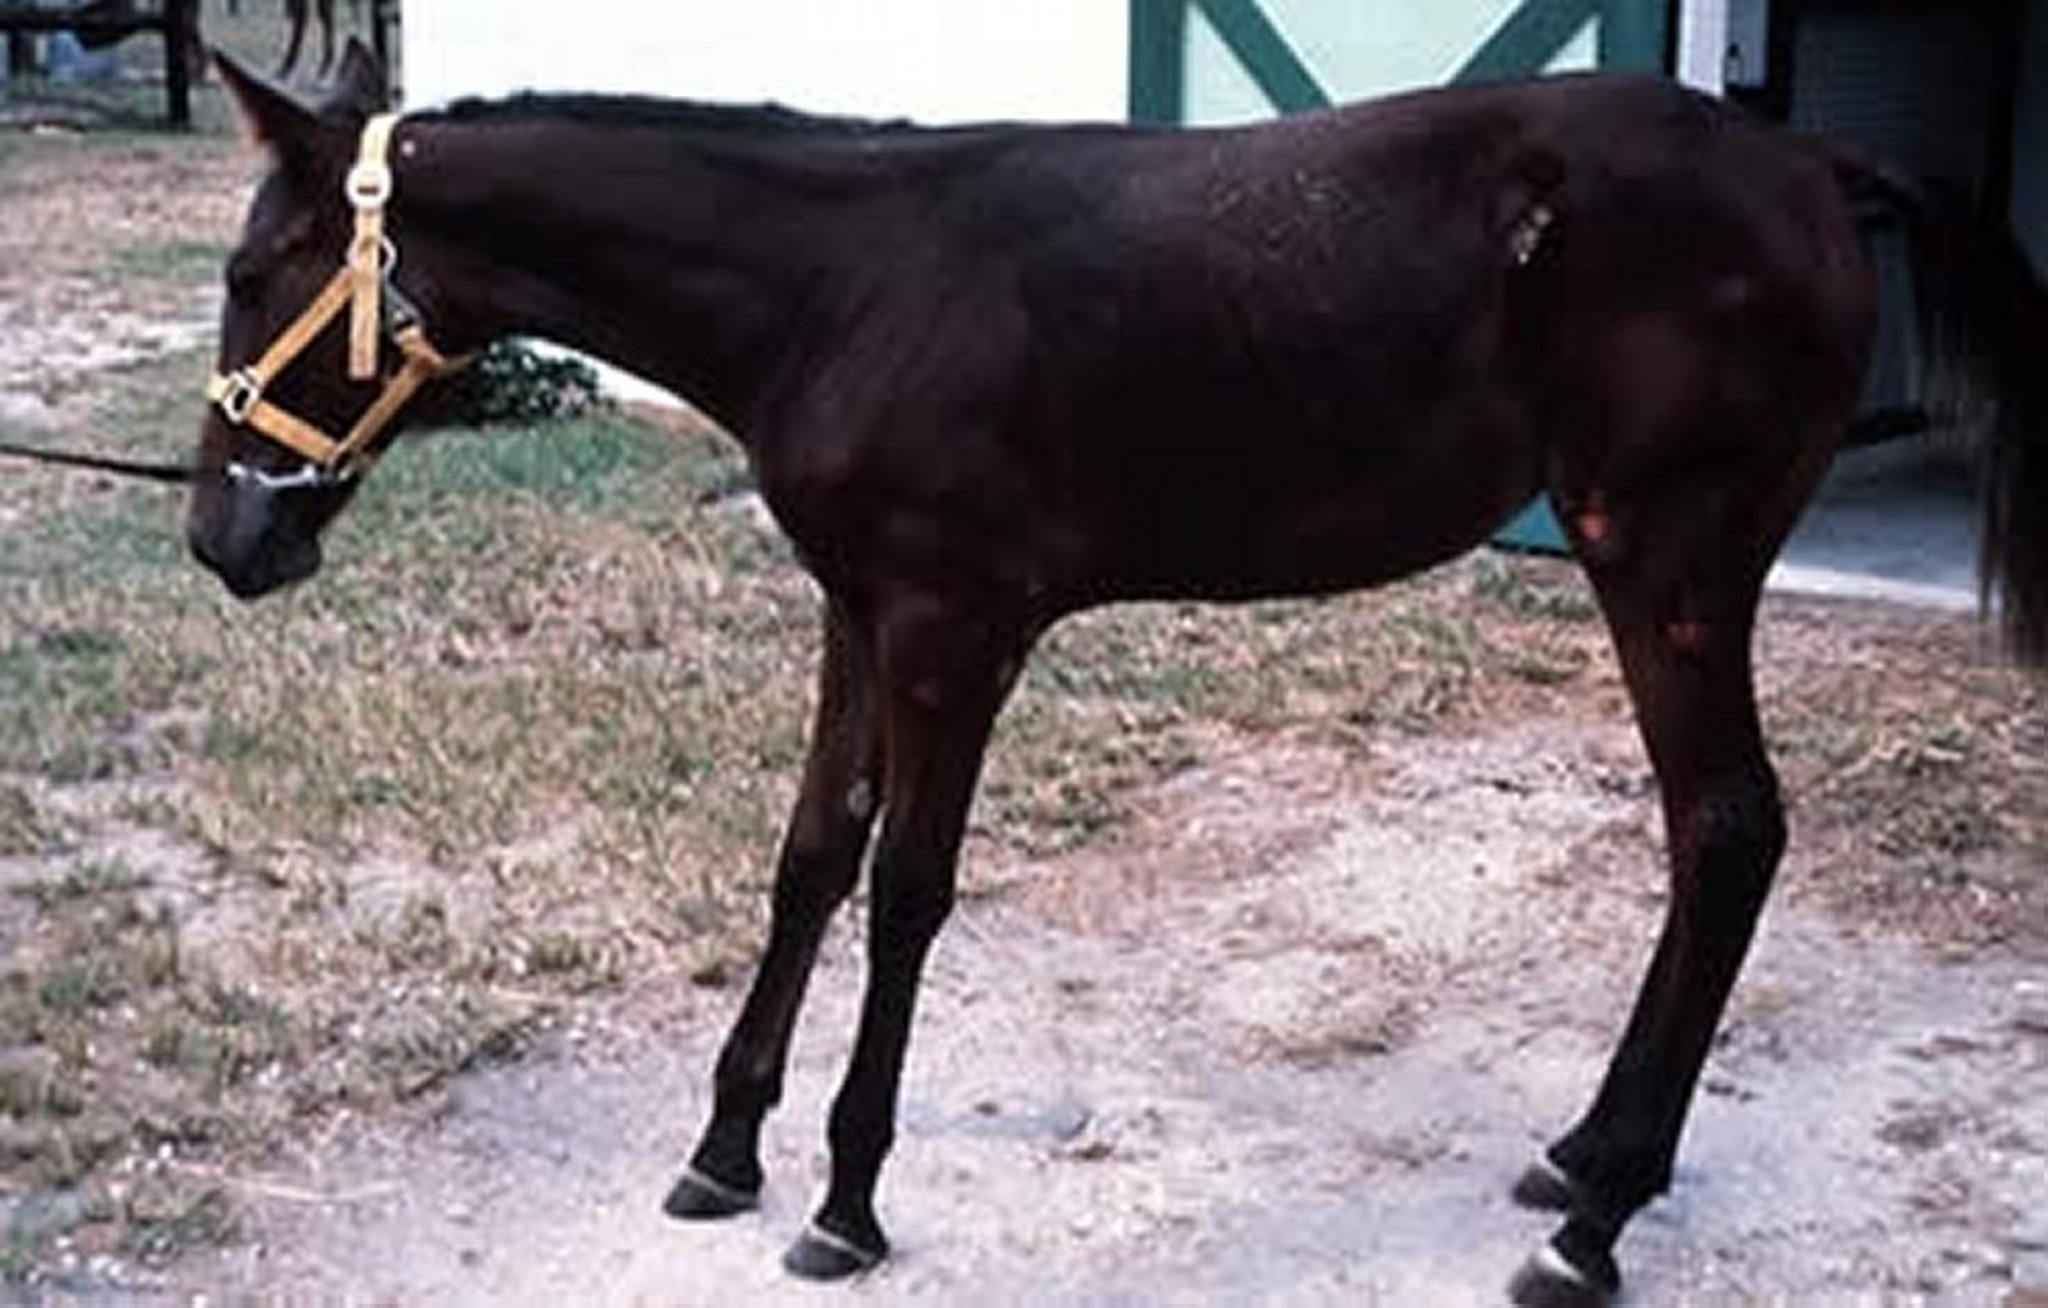 Posture typical of laminitis, horse